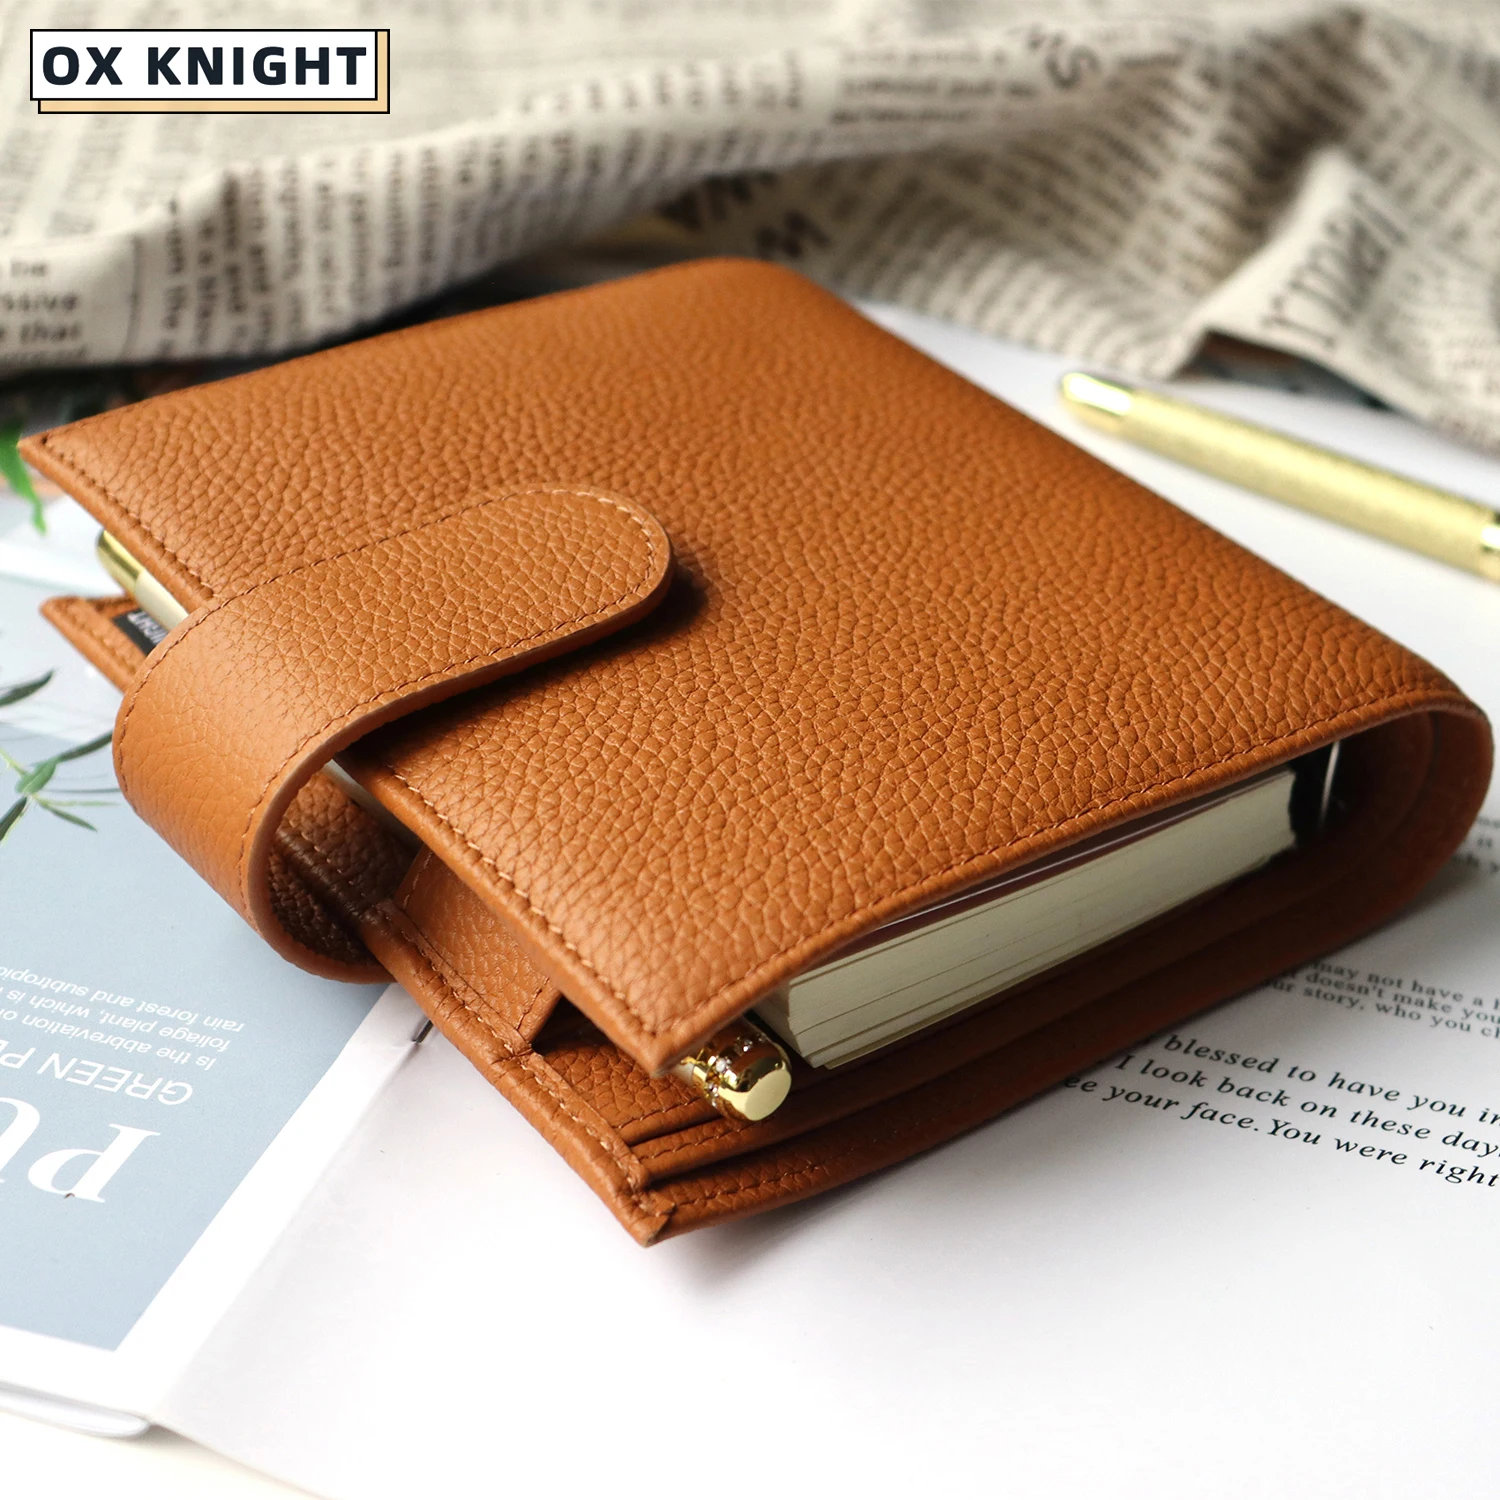 OX KNIGHT 2022 New Arrivals Traveler Journal Planners A7 Size Notebook Pebbled Style with 19MM Ring Organizer Genuine